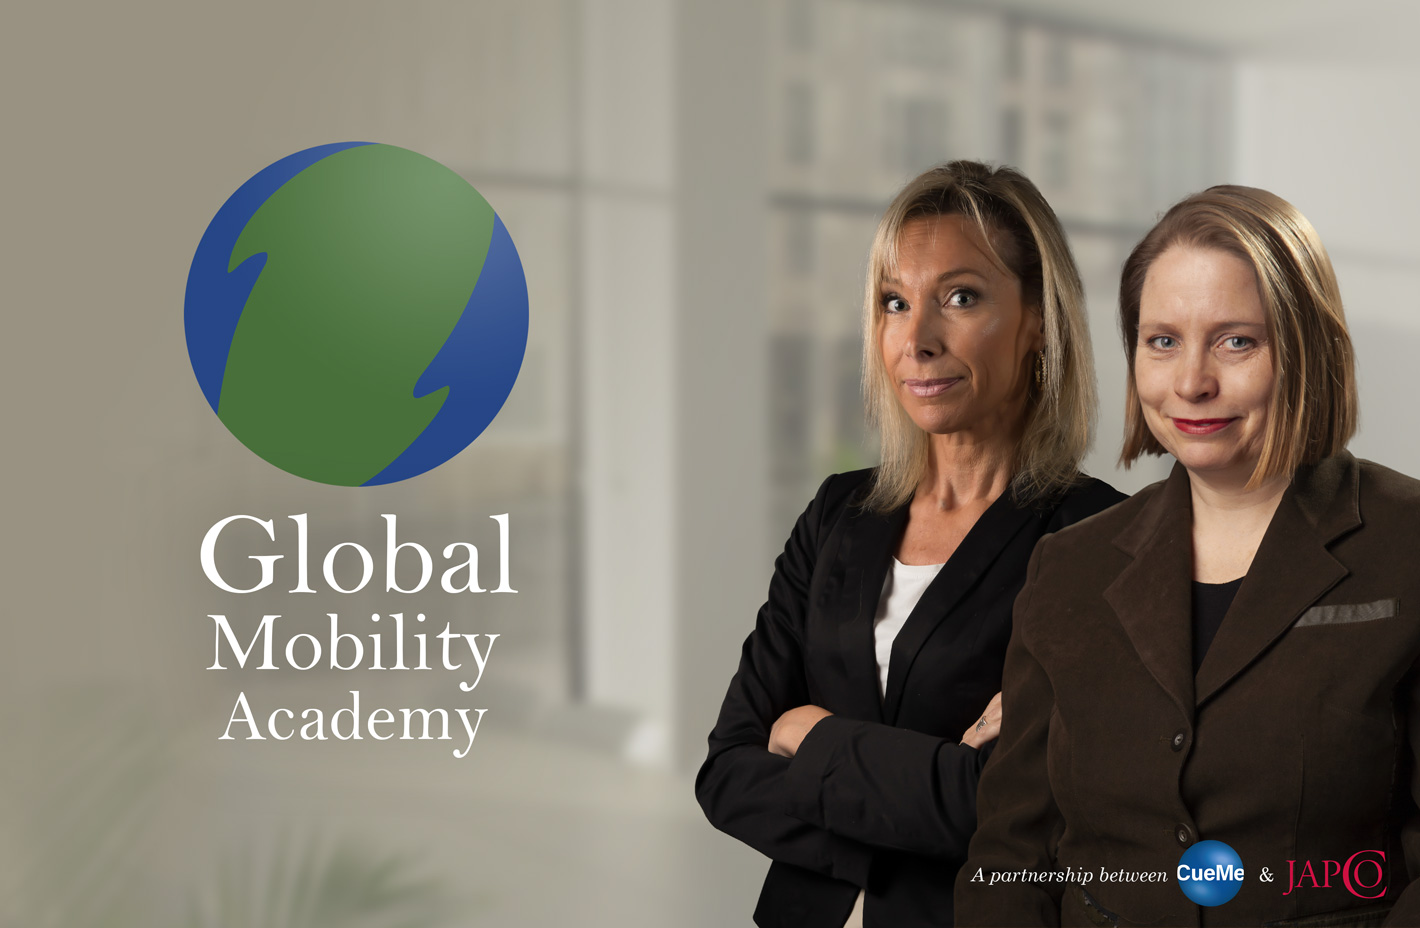 The Global Mobility Academy